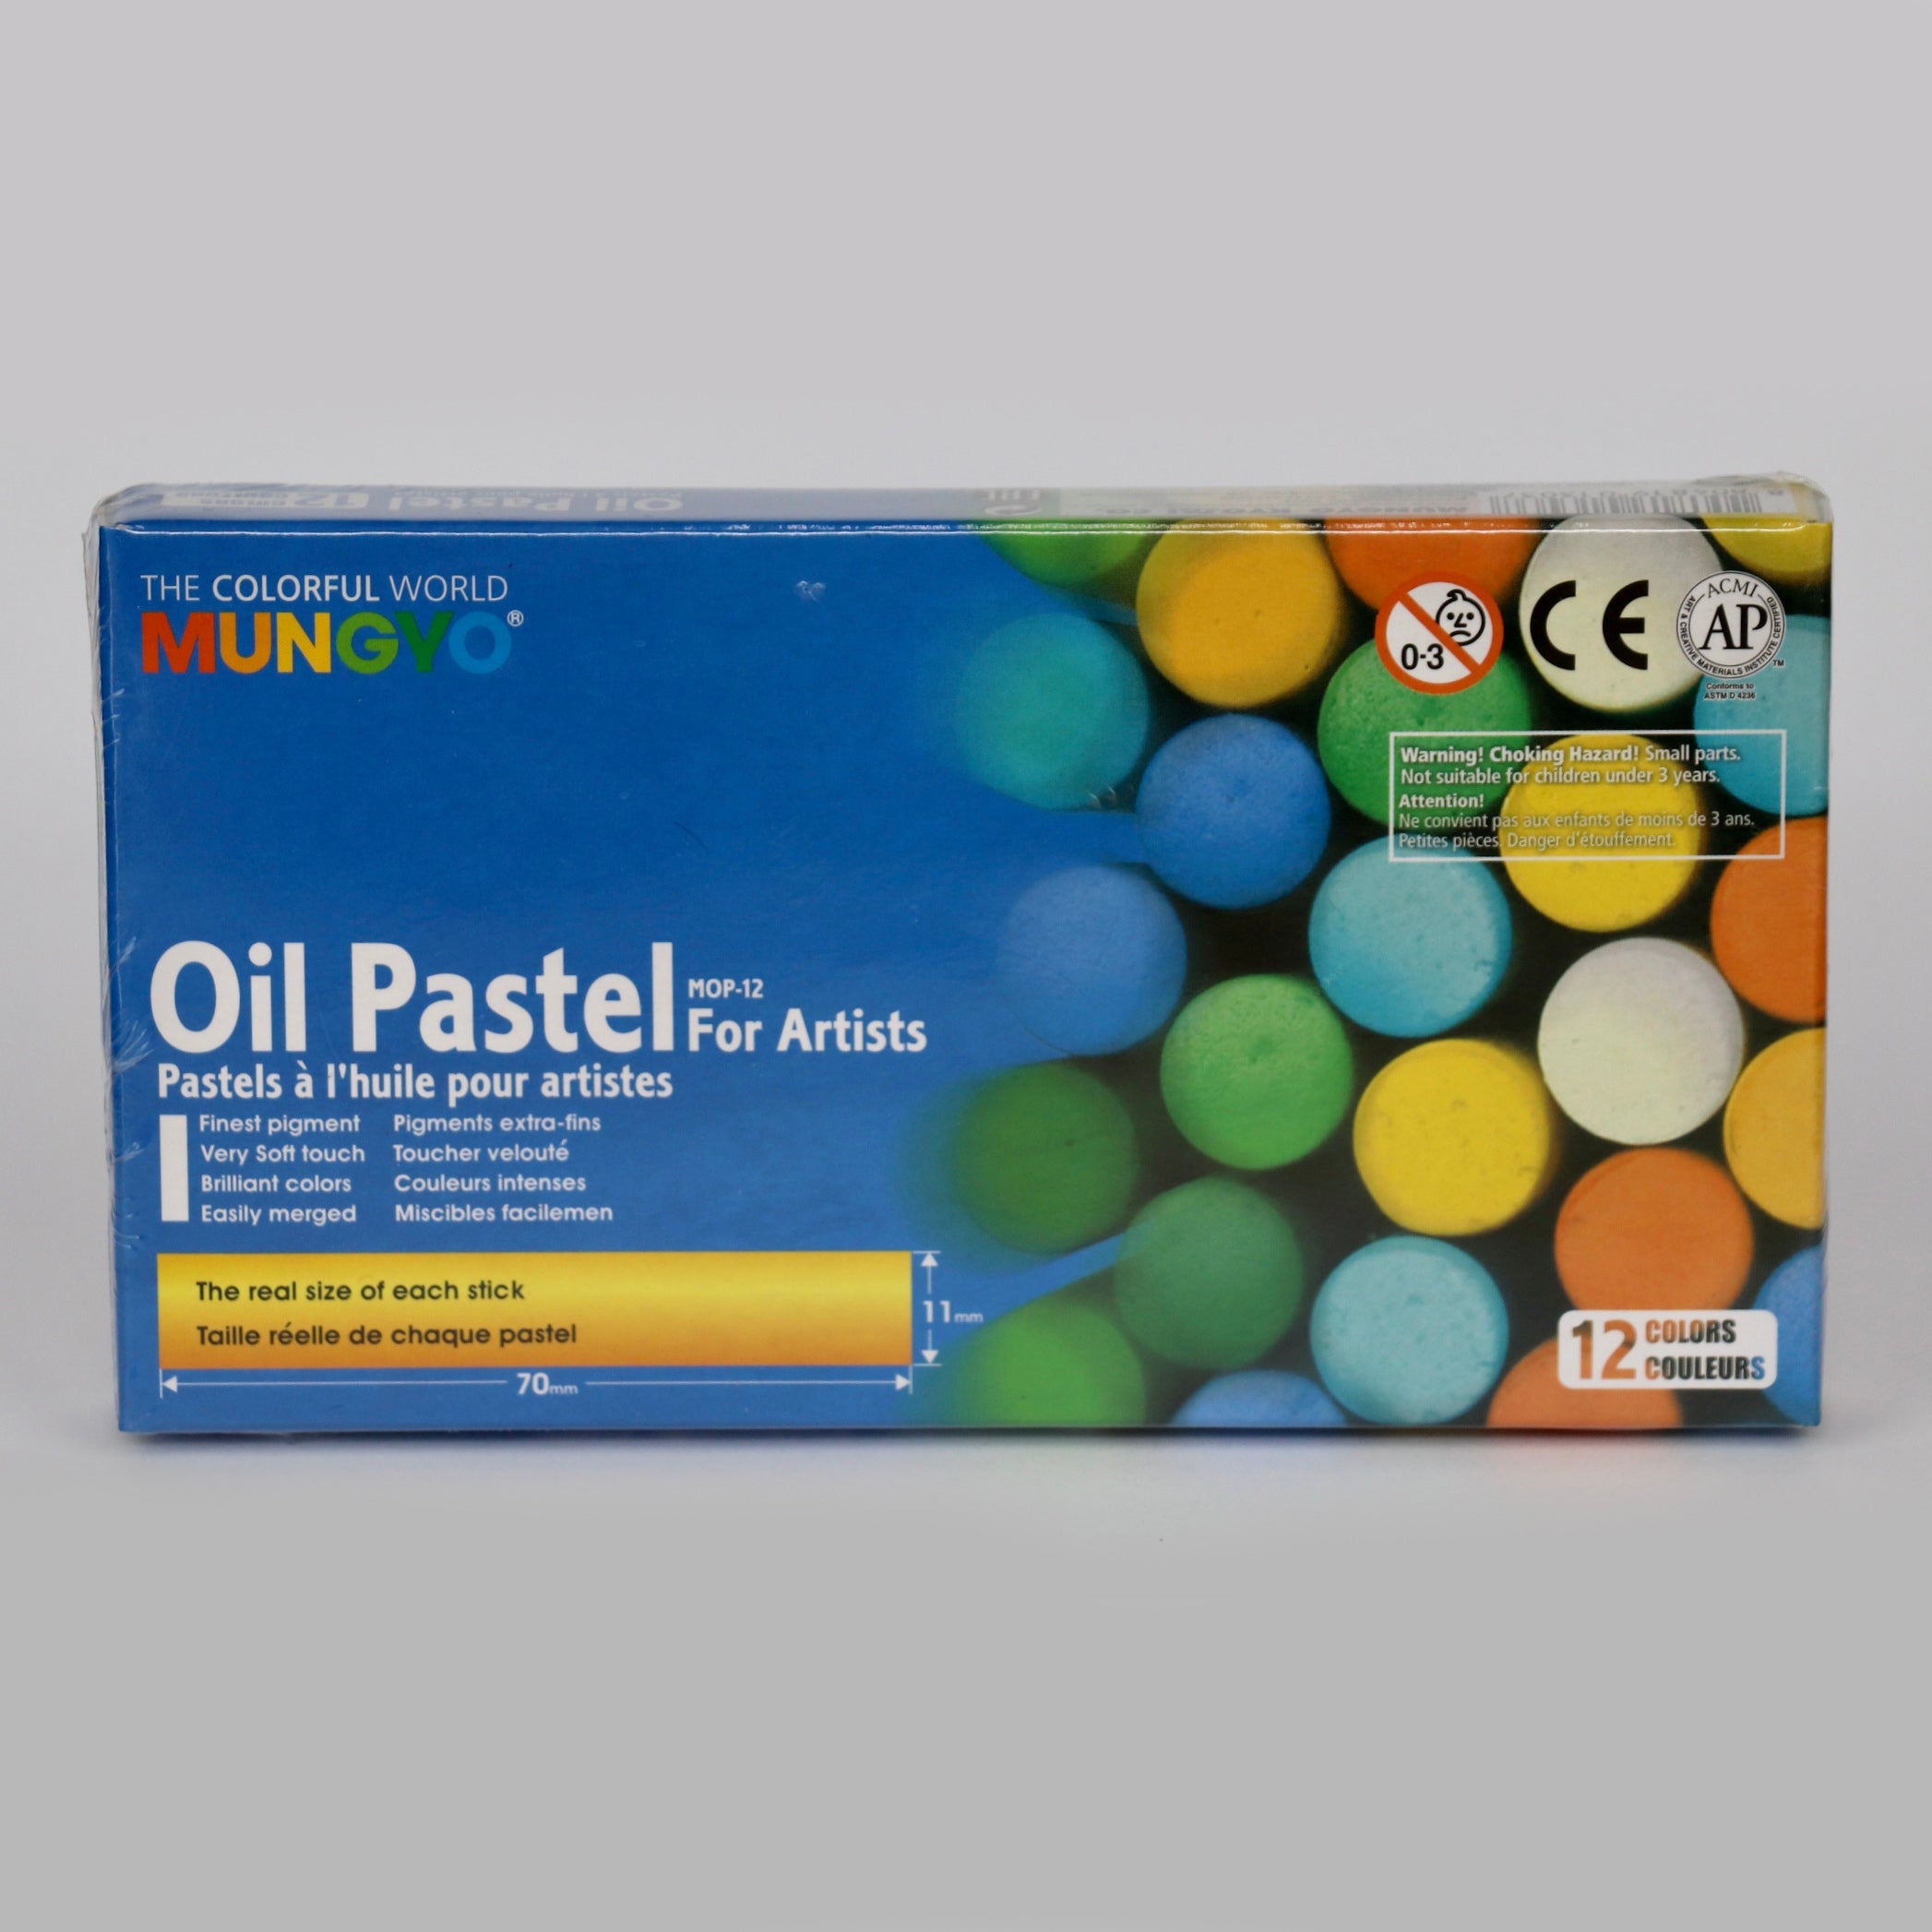 Mungyo Oil Pastels for Artists